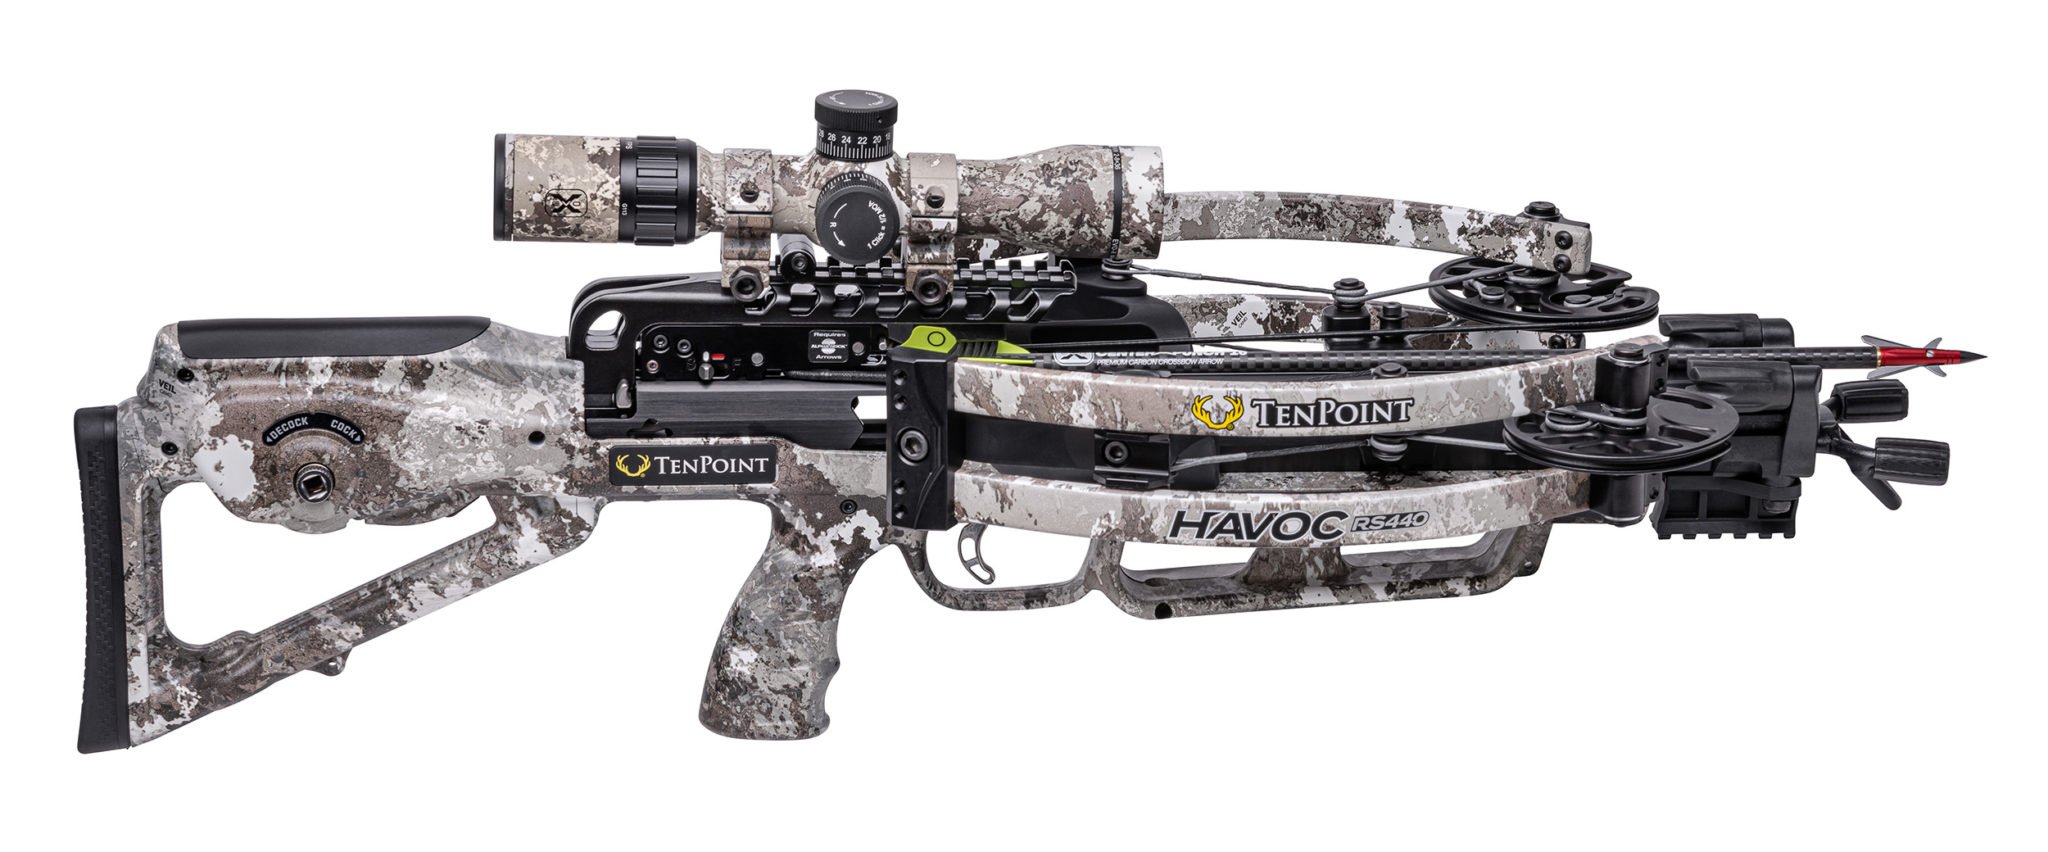 TenPoint Havoc Rs440 in Graphite With Target for sale online 